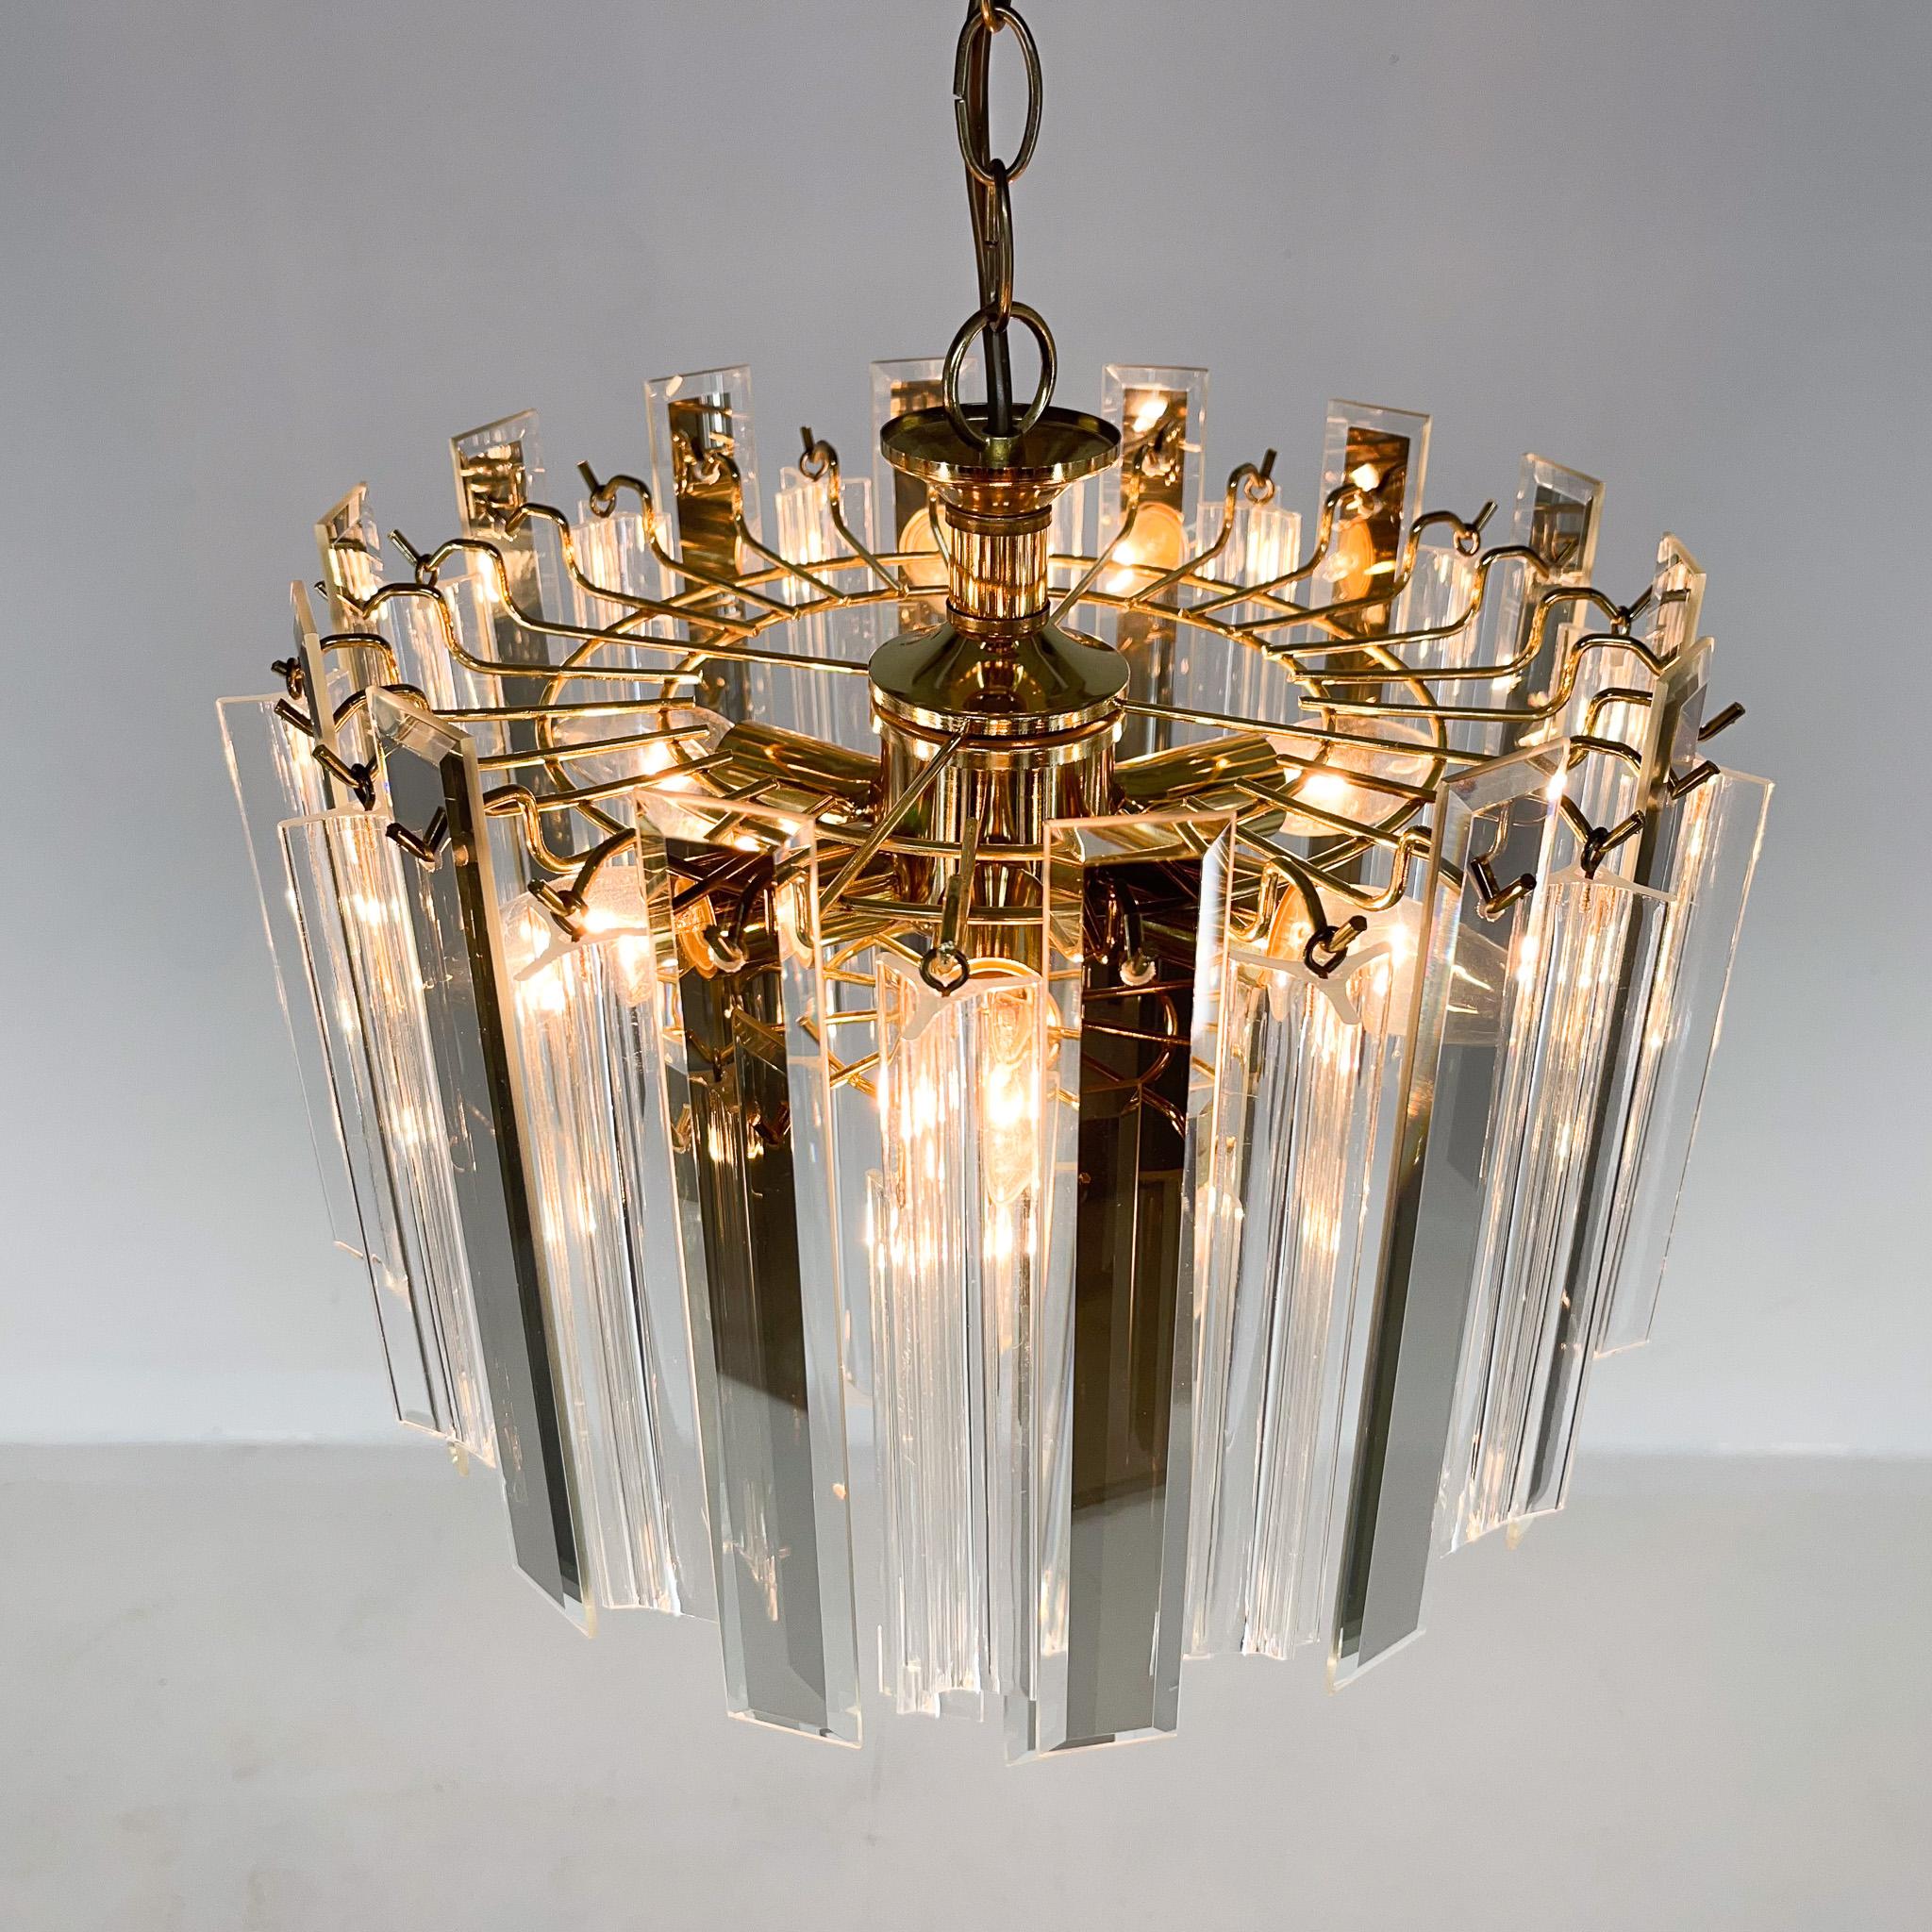 20th Century Midcentury Brass, Glass and Lucite Chandelier, Austria 1970s For Sale